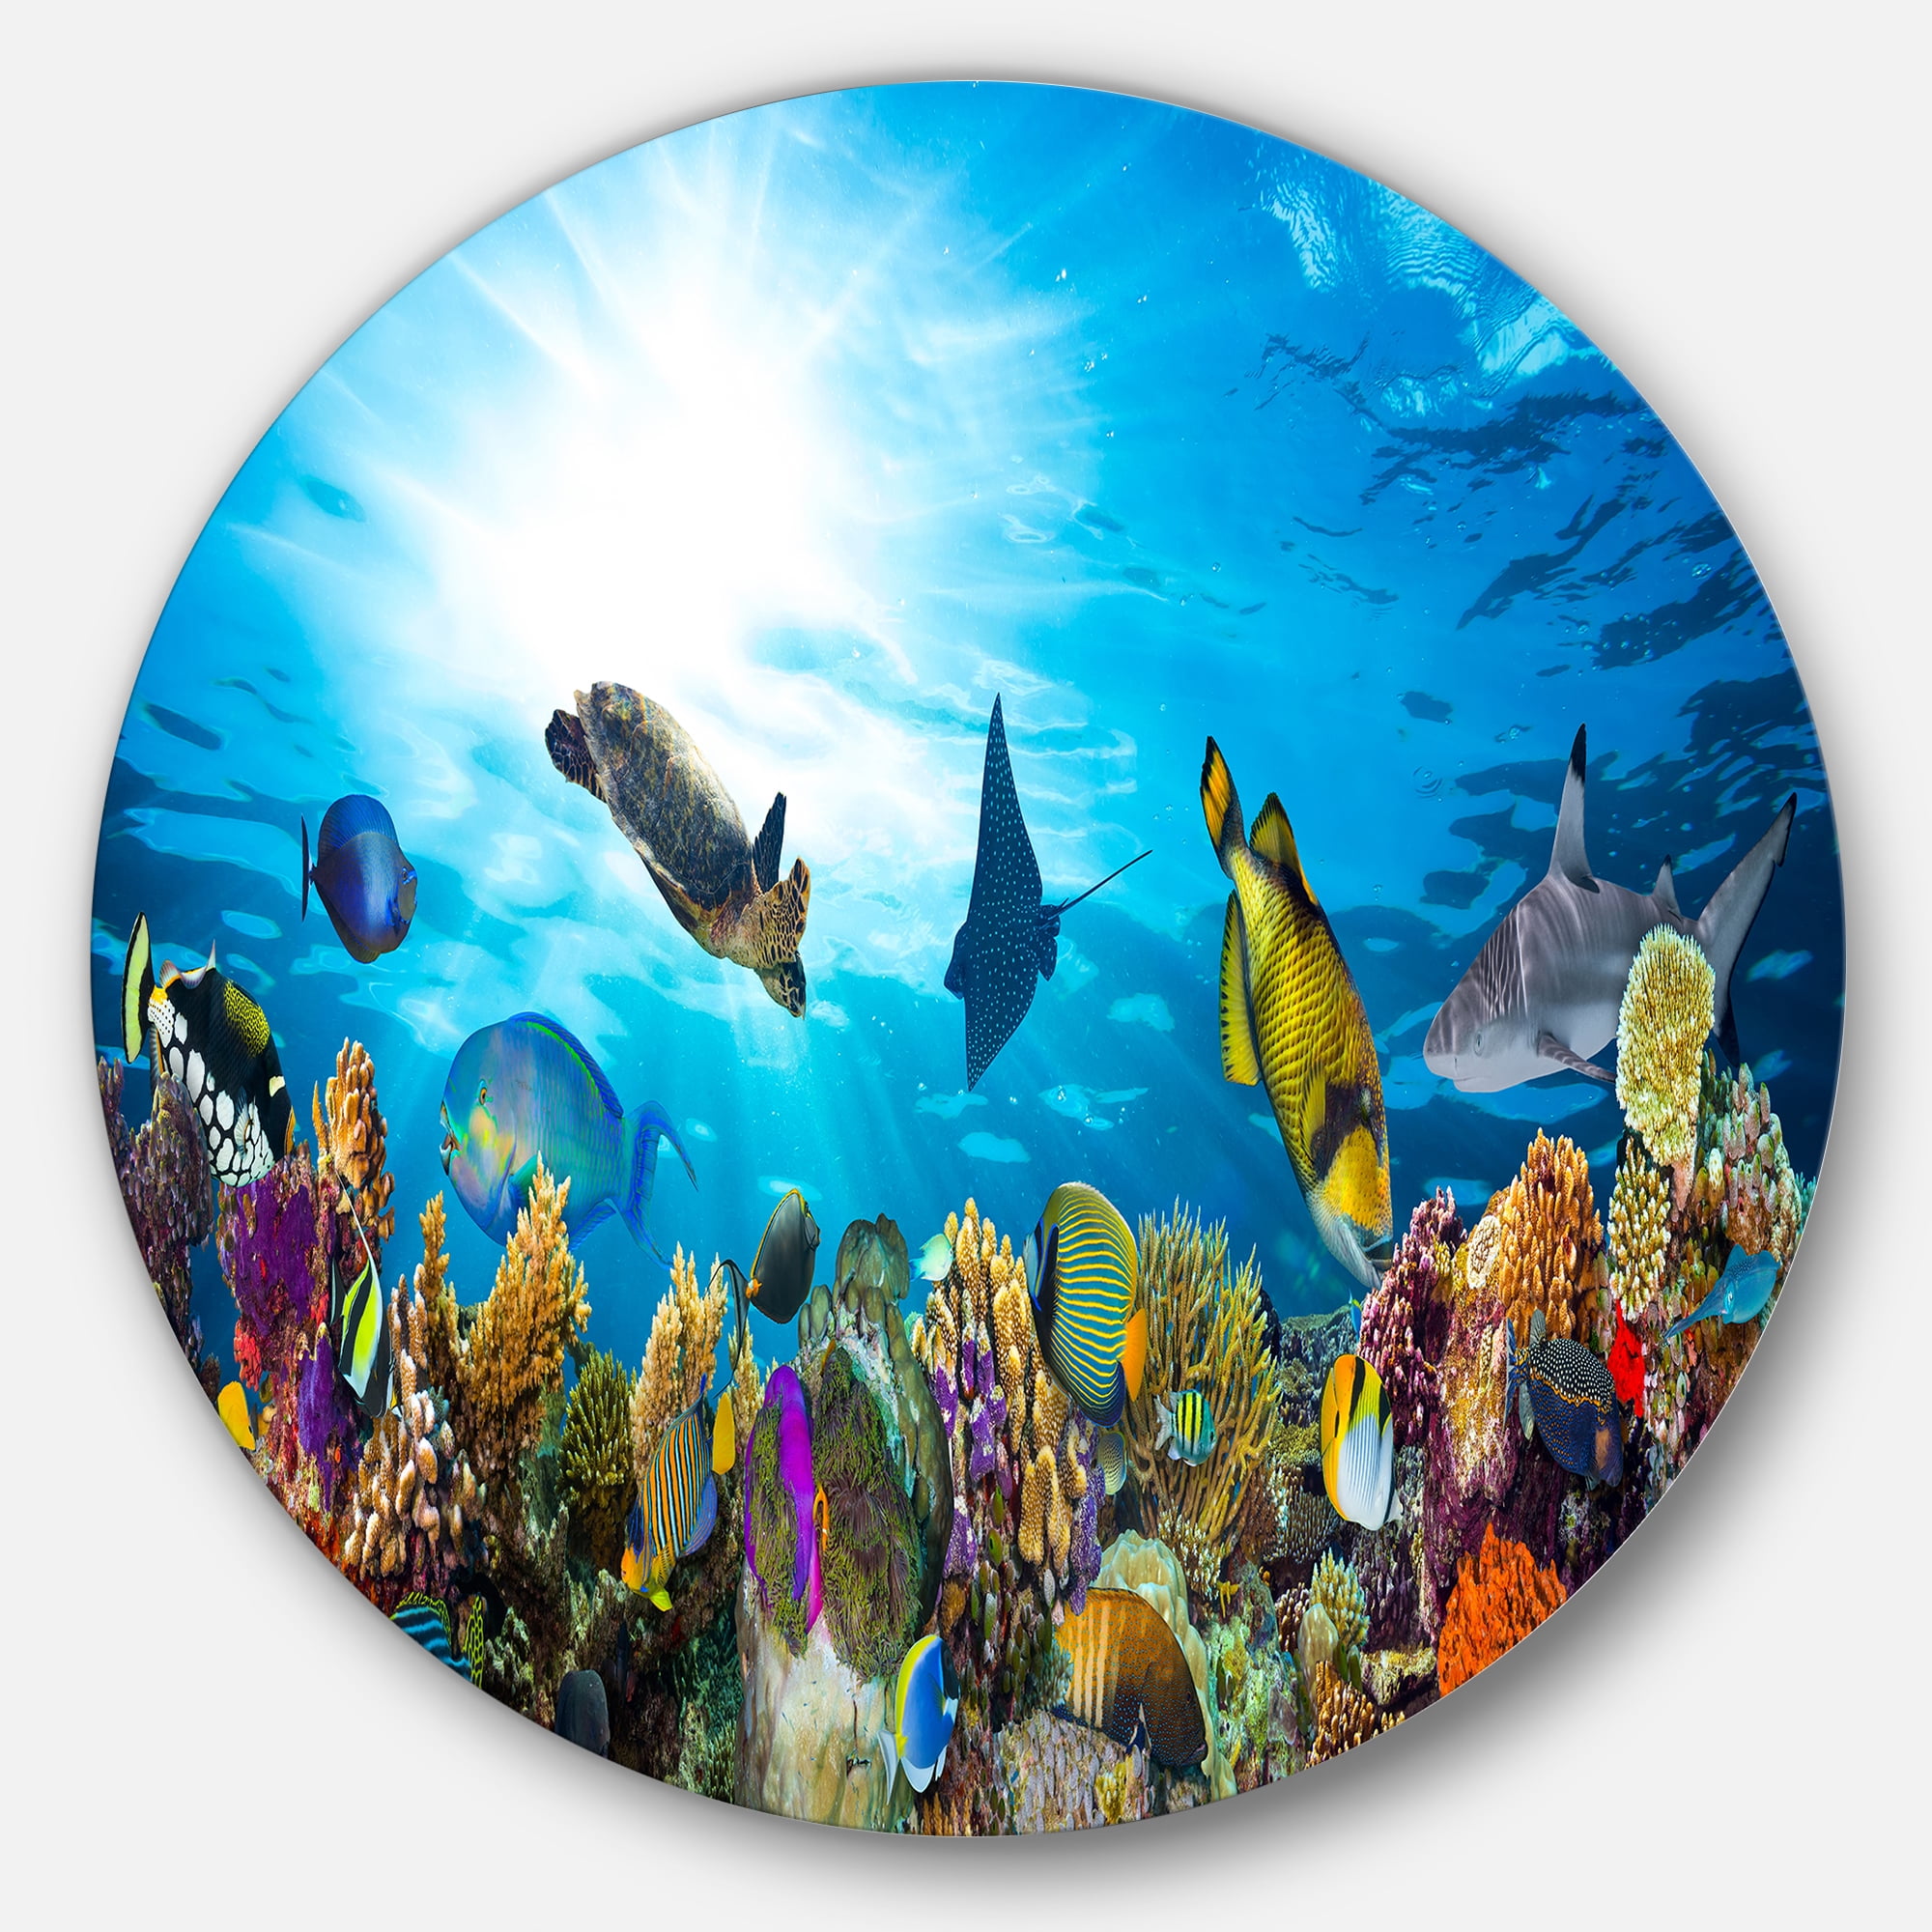 Designart 'Colorful Coral Reef with Fishes' Disc Seascape ...